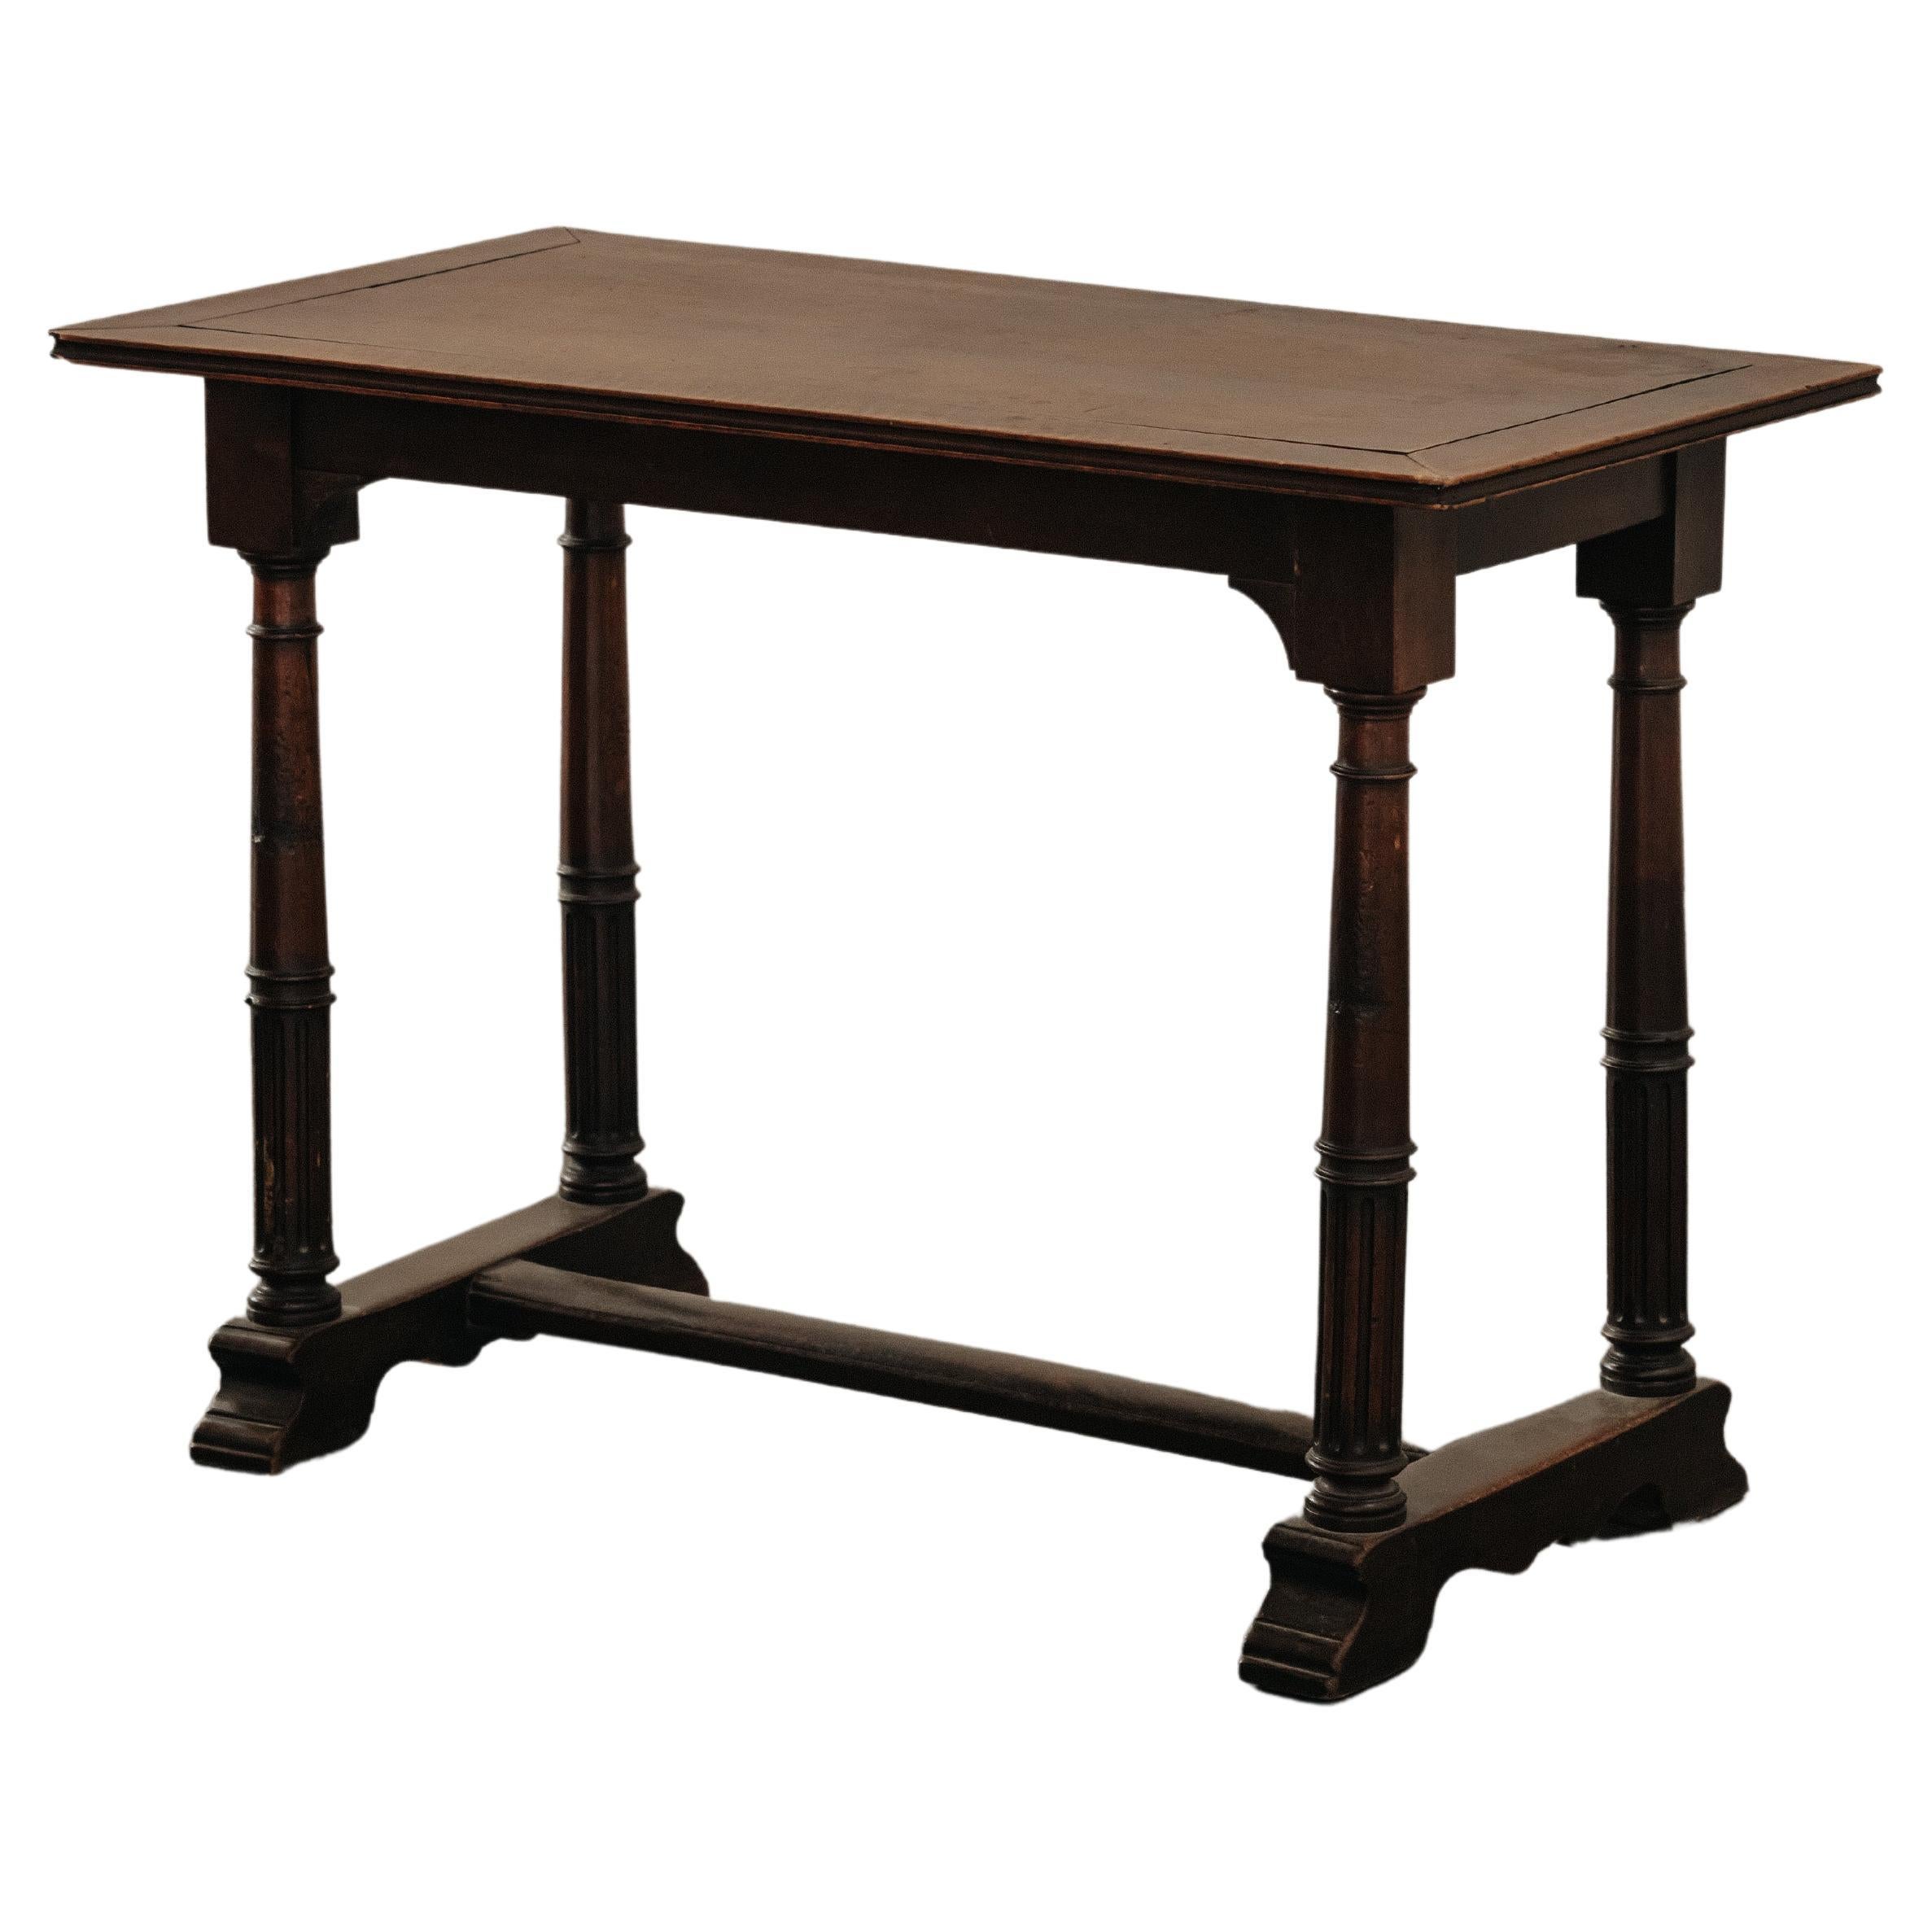 Antique Walnut Side Table from Italy, Circa 1880